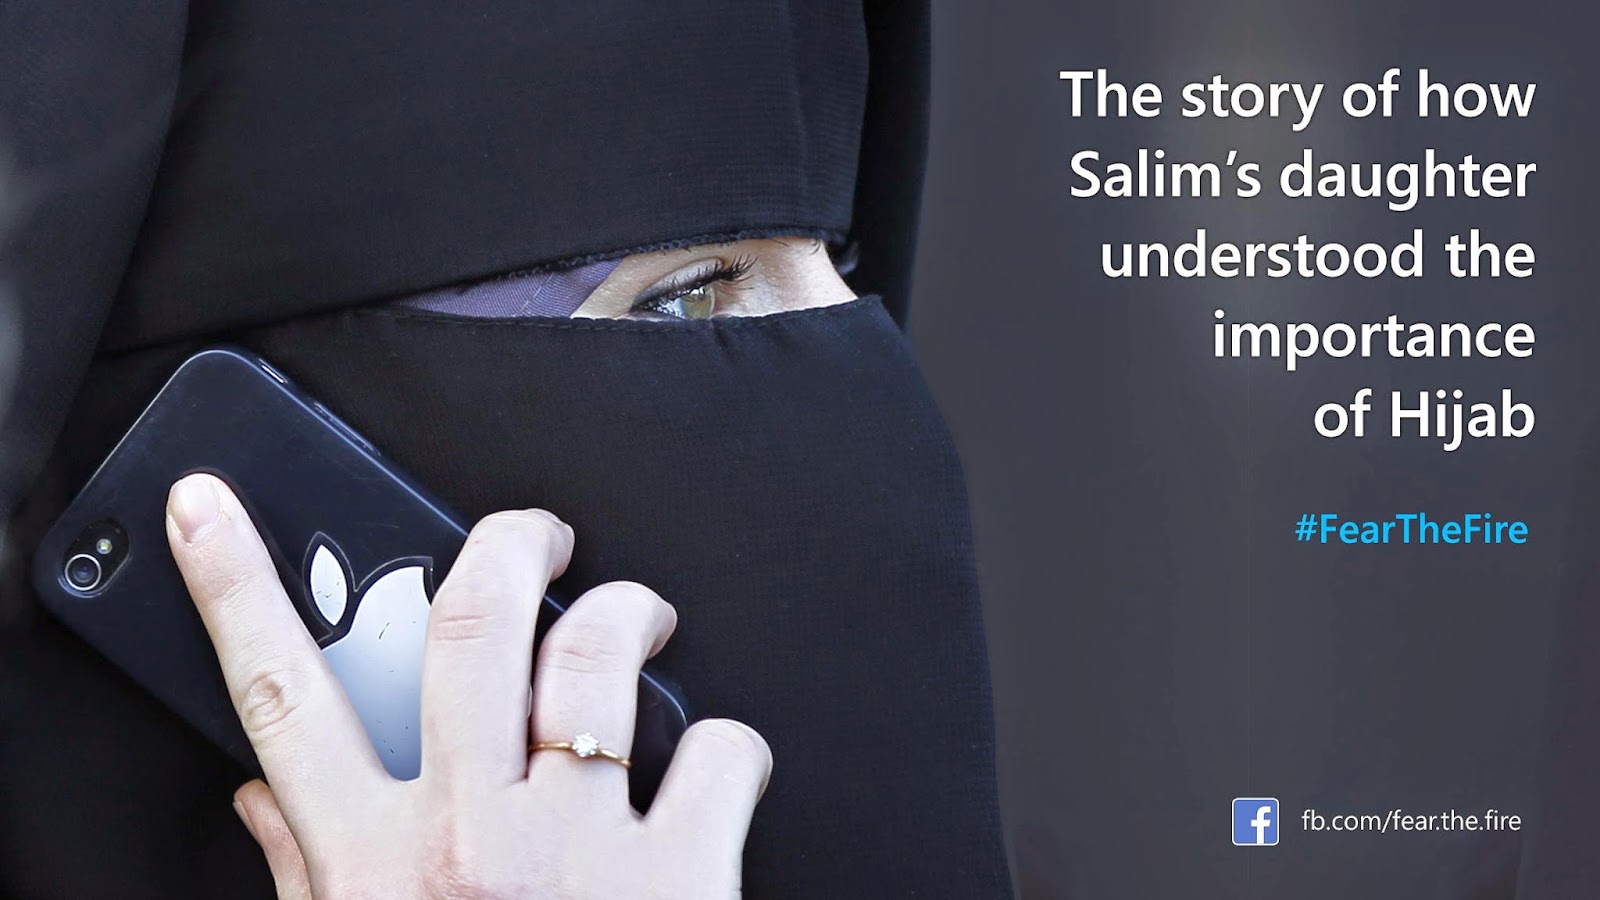 The Story of How Salim's Daughter Understood the Importance of hijab